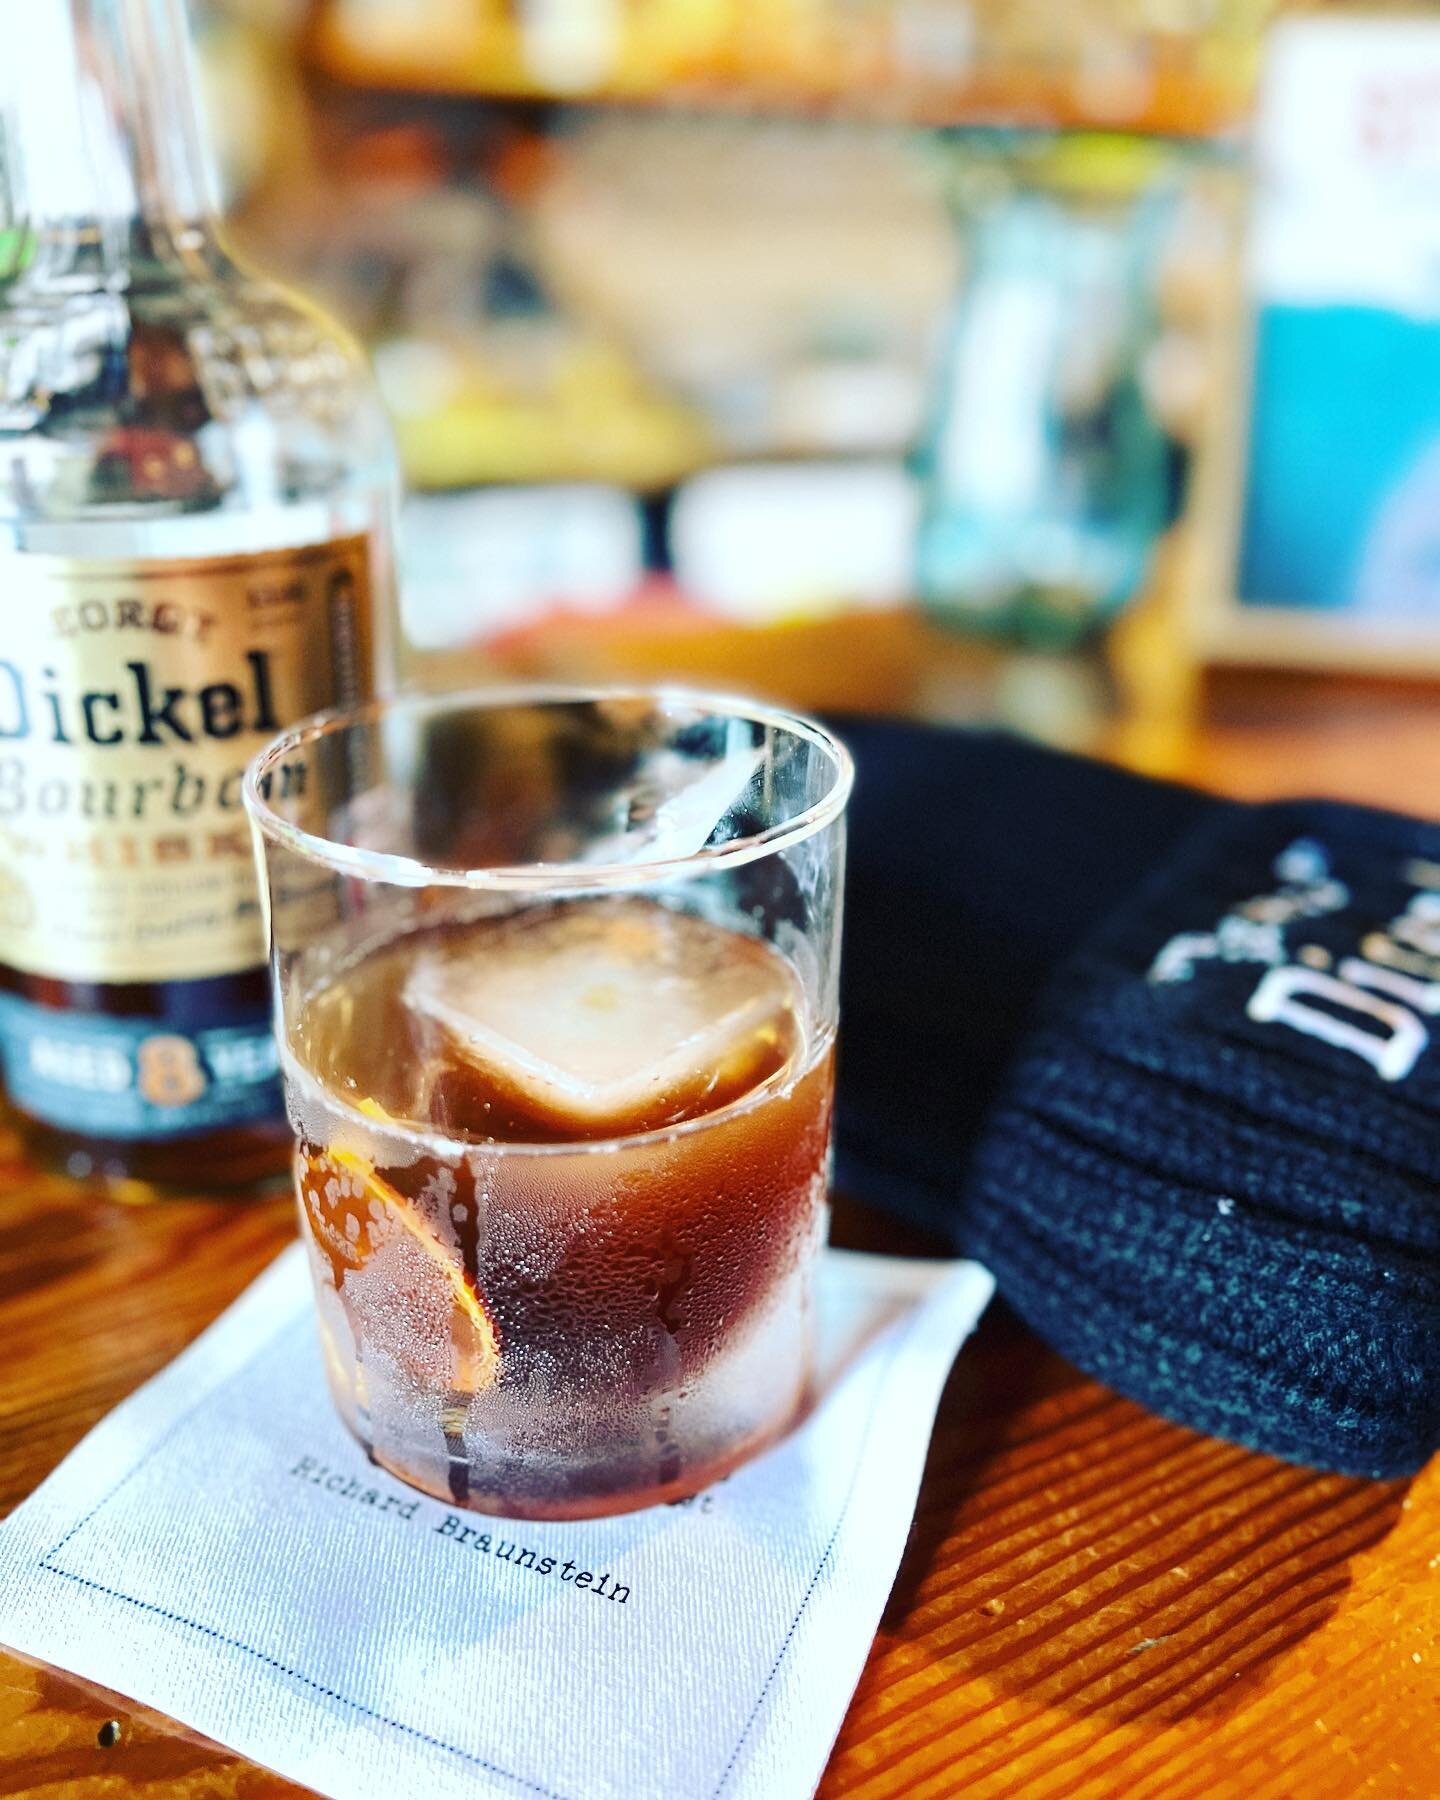 Switch it up tonight and opt for a quite place to watch the game and grab a warm coffee or tasty Dickel bourbon cocktail. Phil and James holding court.